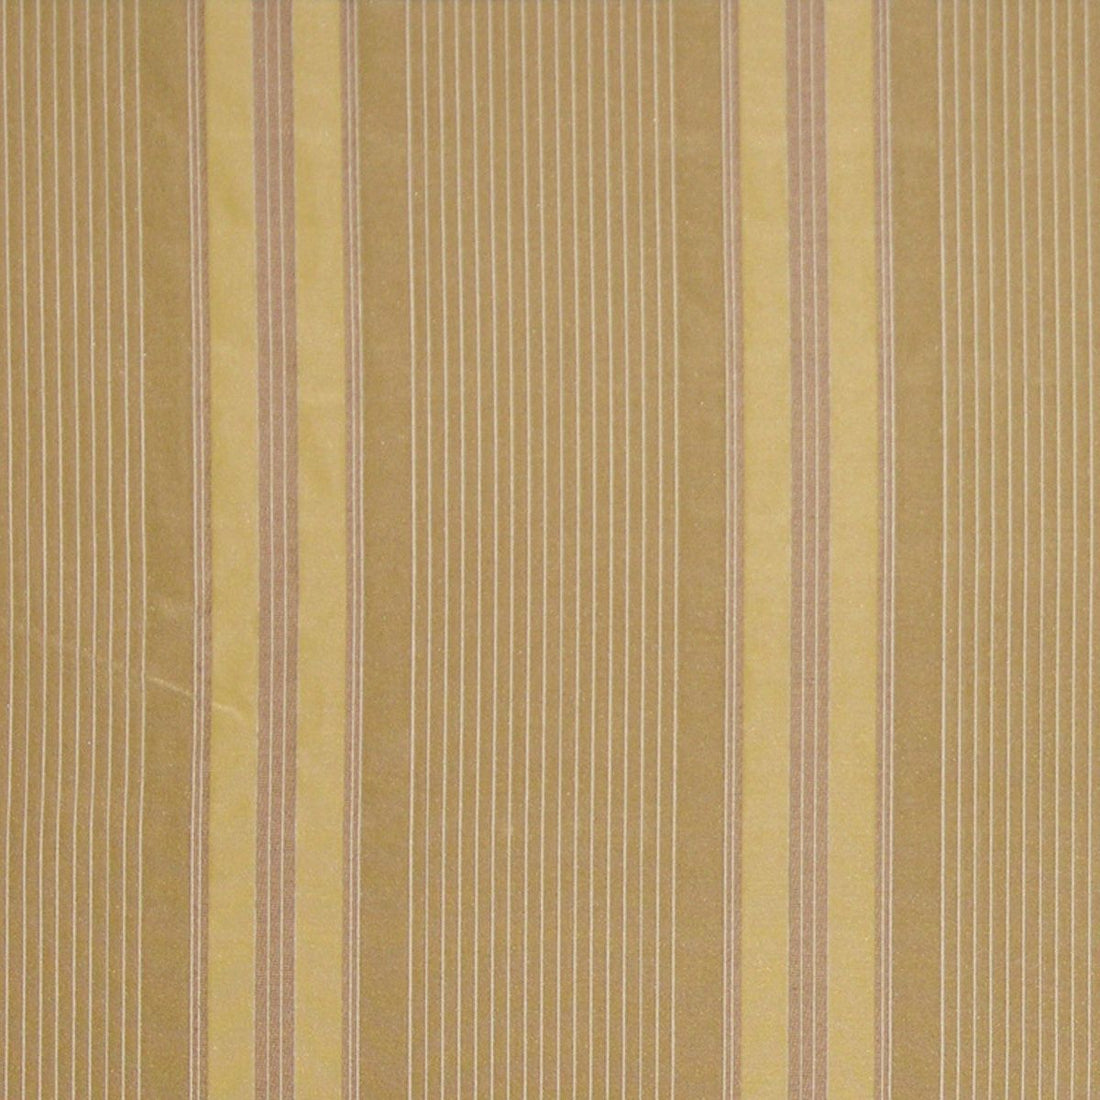 Malabar Stripe fabric in marigold color - pattern number HB 00071440 - by Scalamandre in the Old World Weavers collection